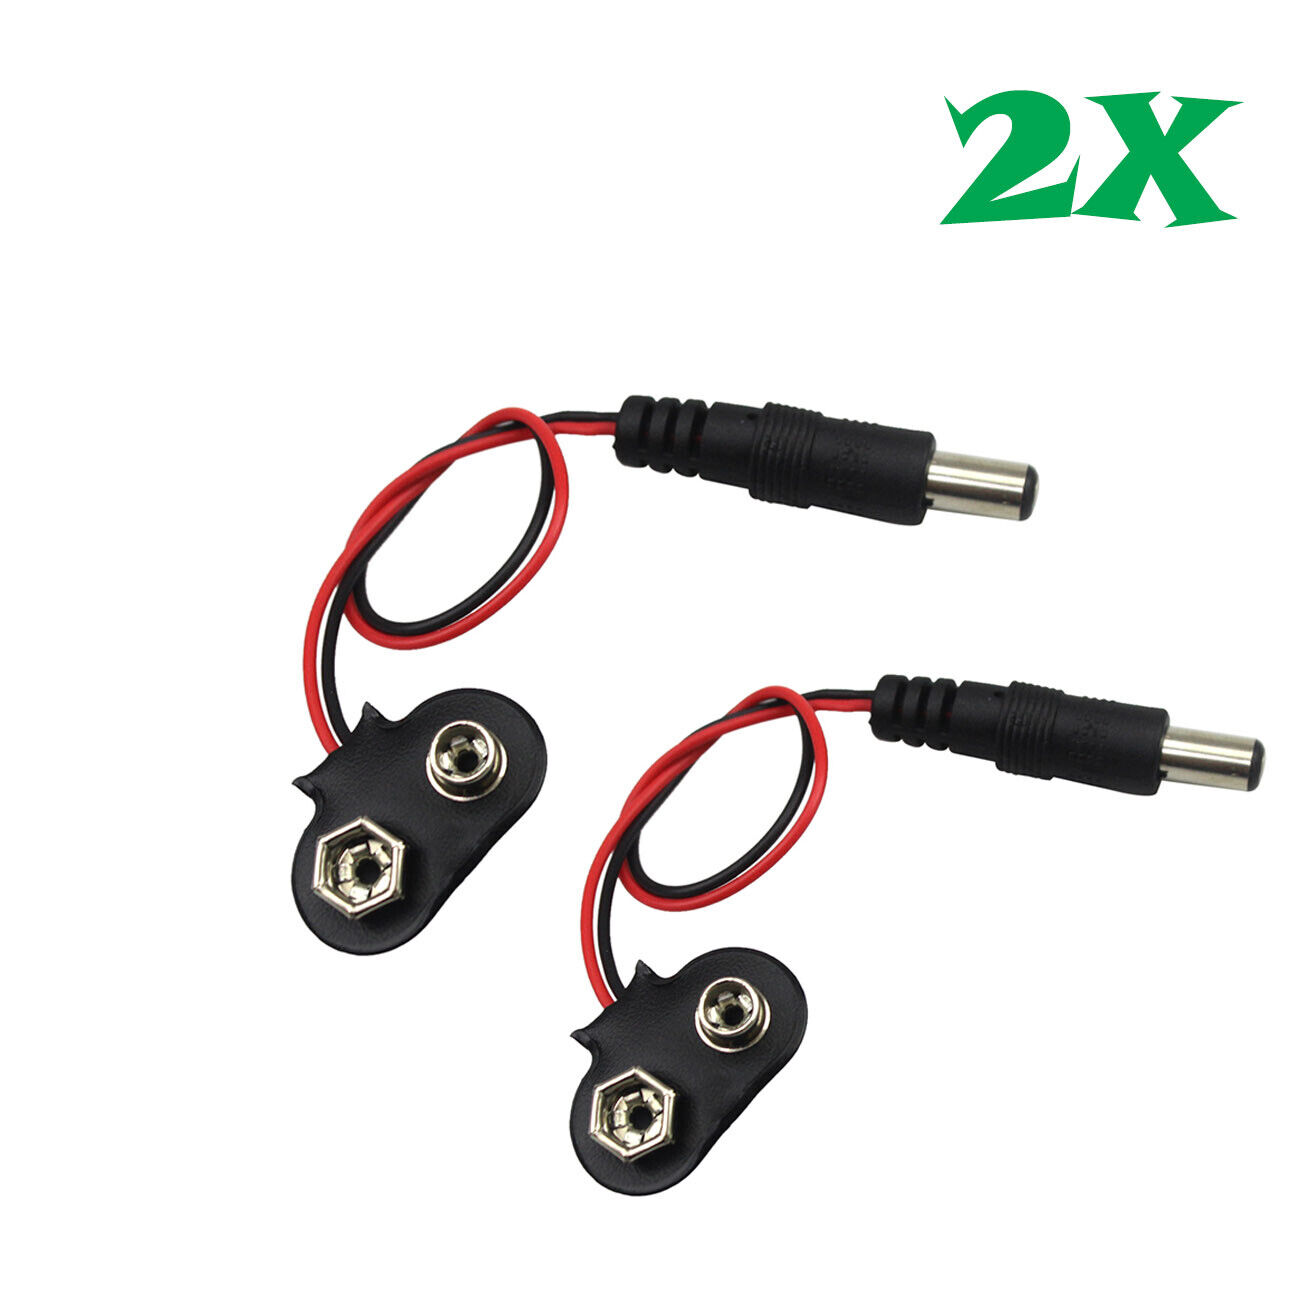 2 Pcs 2.1 x 5.5mm Male DC Power Plug to 9V Battery Clip Adapter Cable Center + Envistia/Generic 2.1 x 5.5mm DC Power Plug to 9V